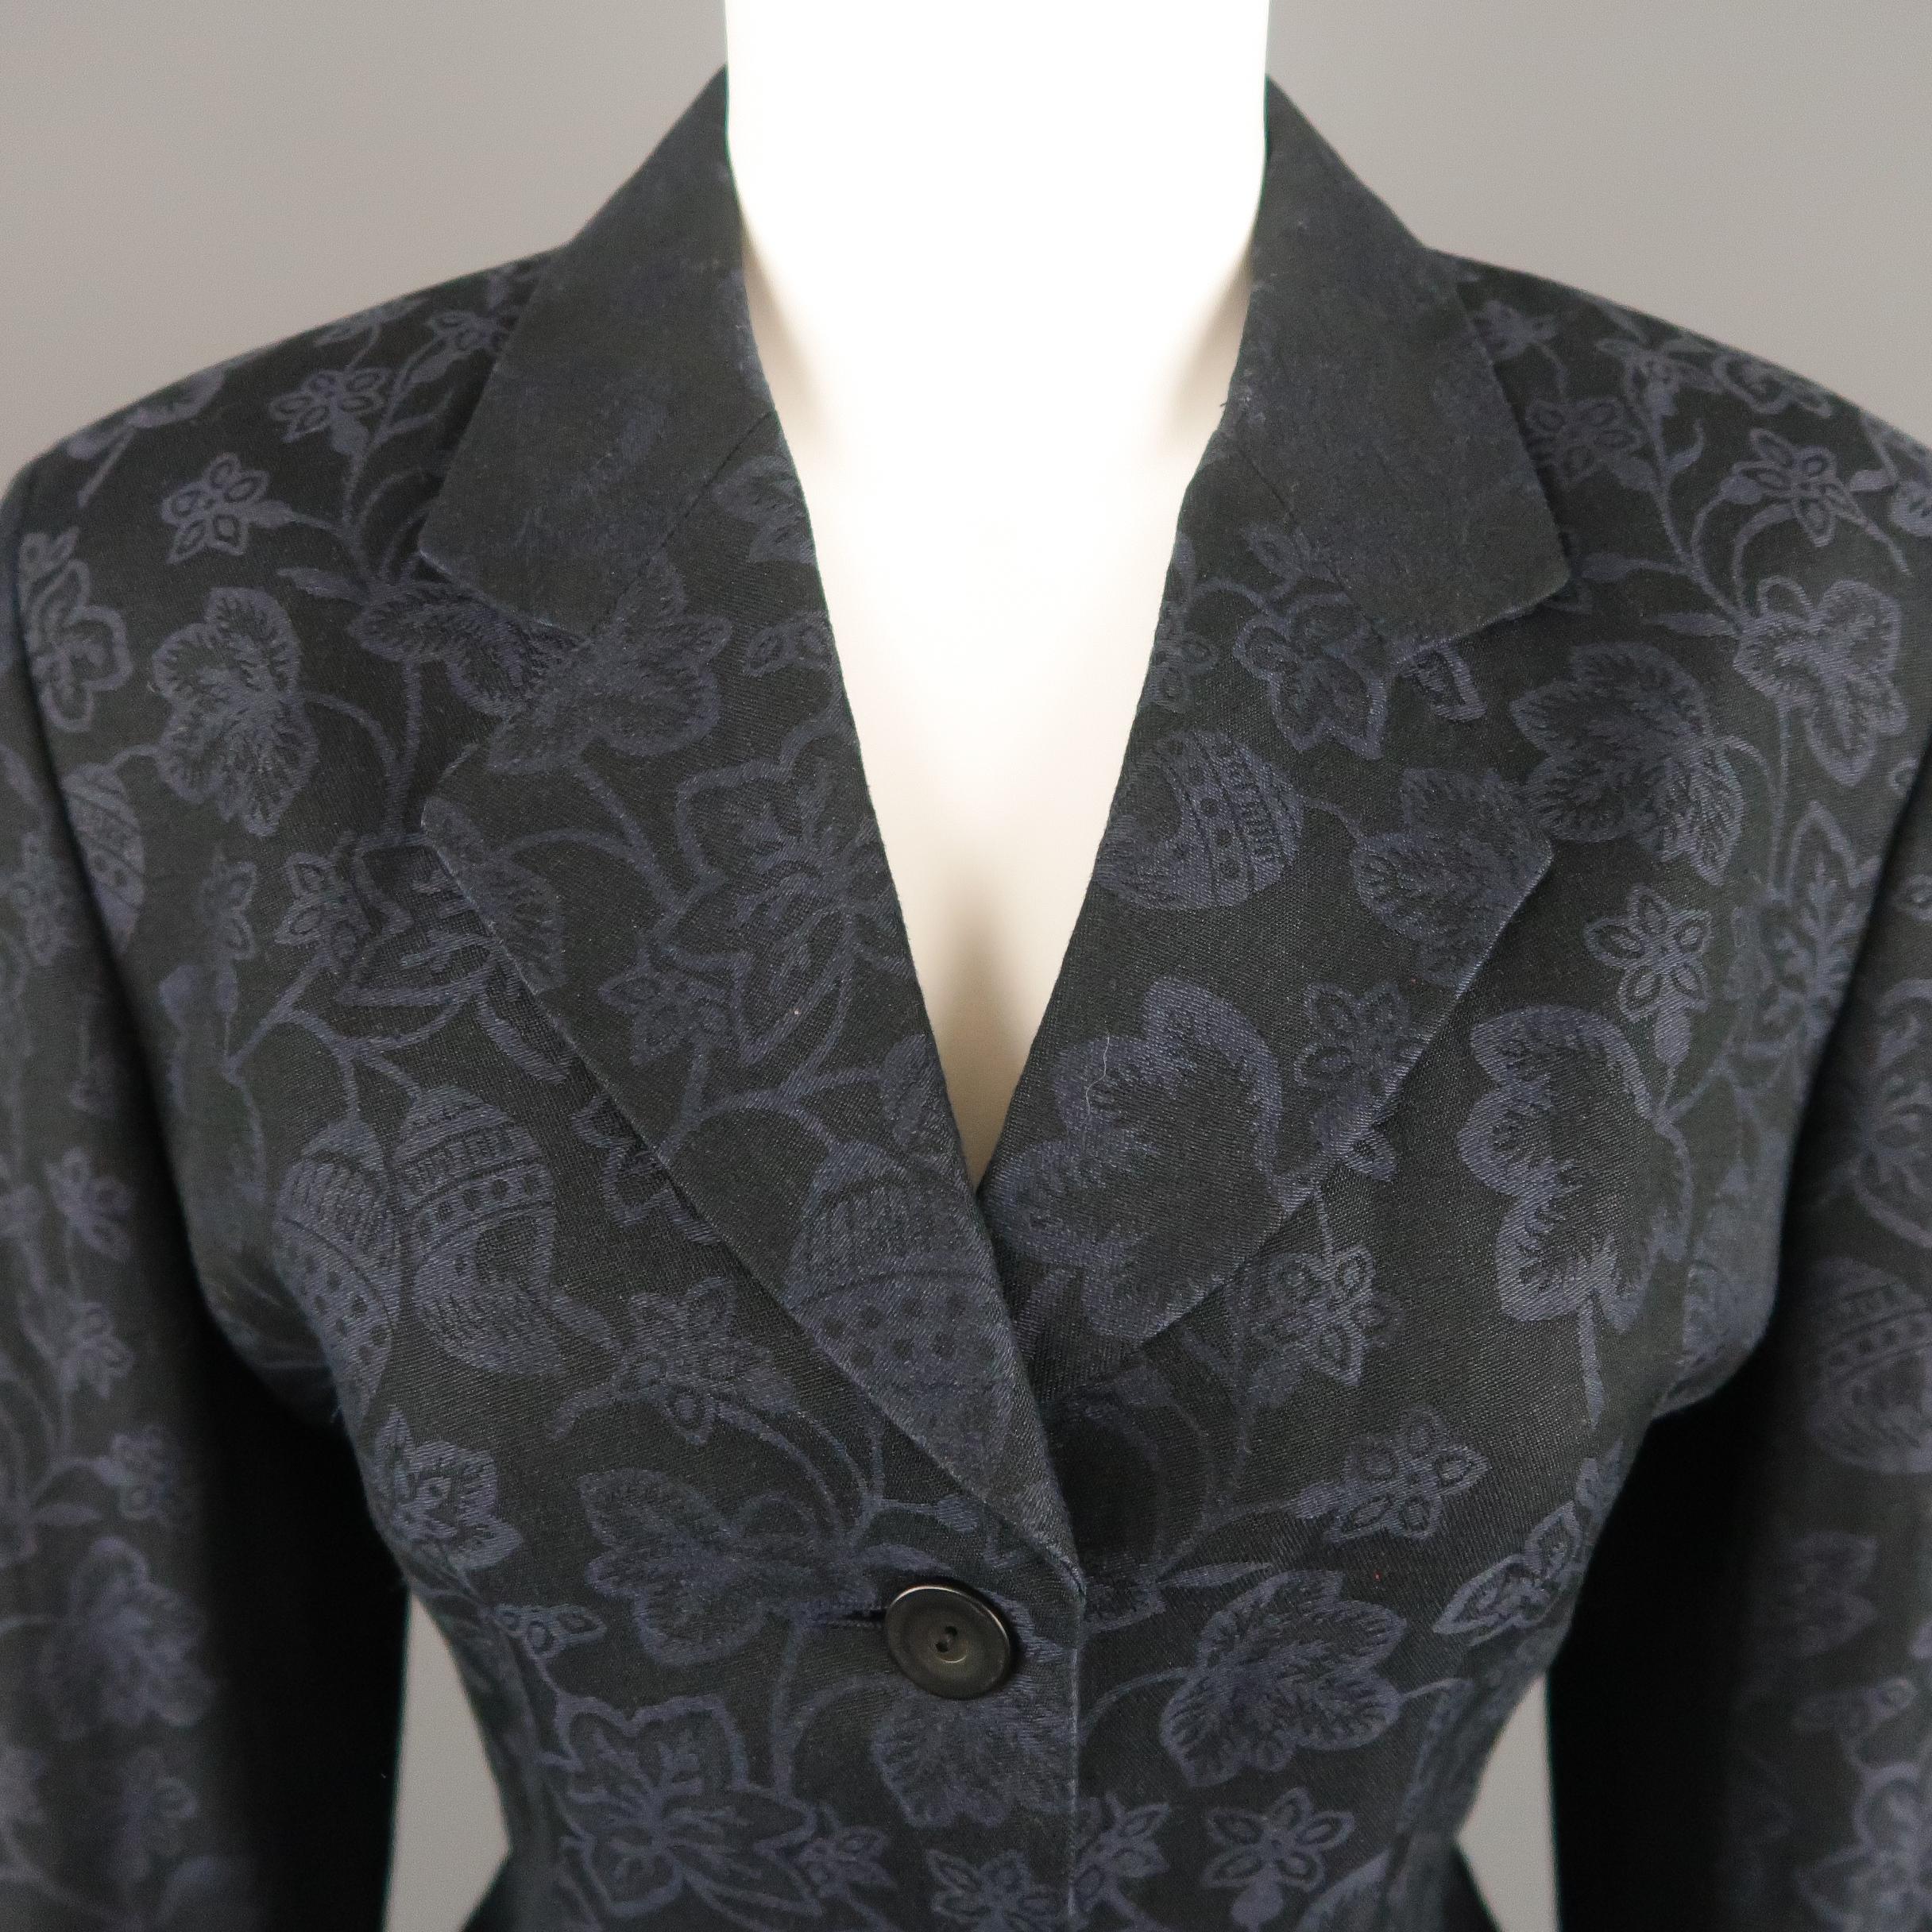 KENZO fashion blazer comes in navy floral print fabric with a notch lapel, tailored silhouette, and single breasted three button front. Missing button on cuff. As-is.
 
Very Good Pre-Owned Condition.
Marked: (no size)
 
Measurements:
 
Shoulder: 16